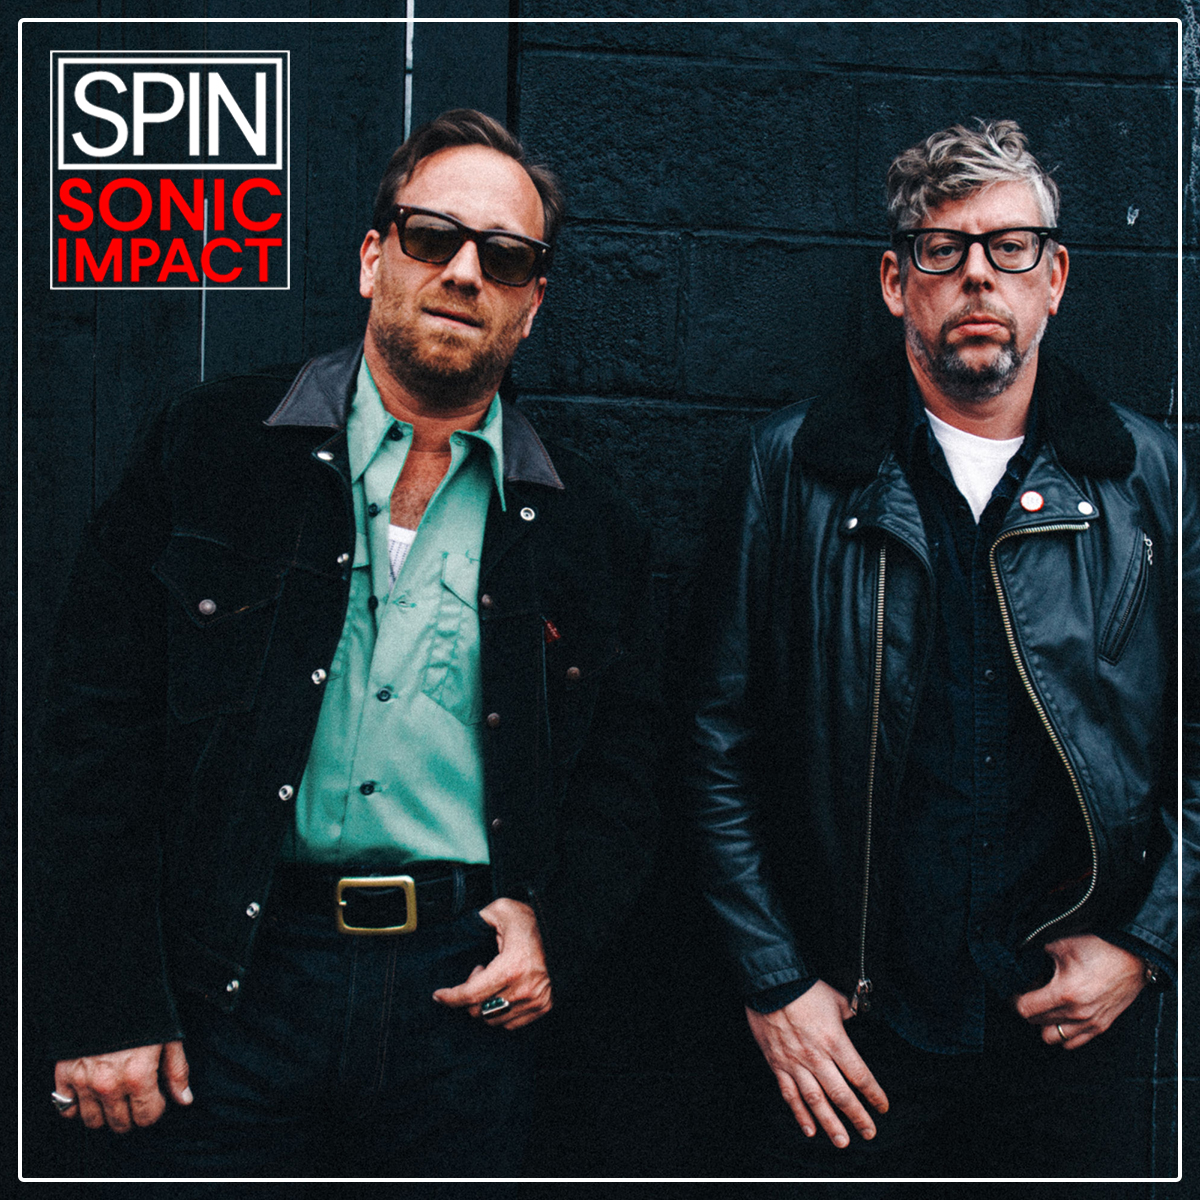 .@TheBlackKeys are on @SPINmagazine's @SPINSonicImpact podcast to discuss with host @goldbergatash the story of the band and their music, on the release of their new album, 'Ohio Players.' You can hear their conversation at nonesuch.com/journal/listen…